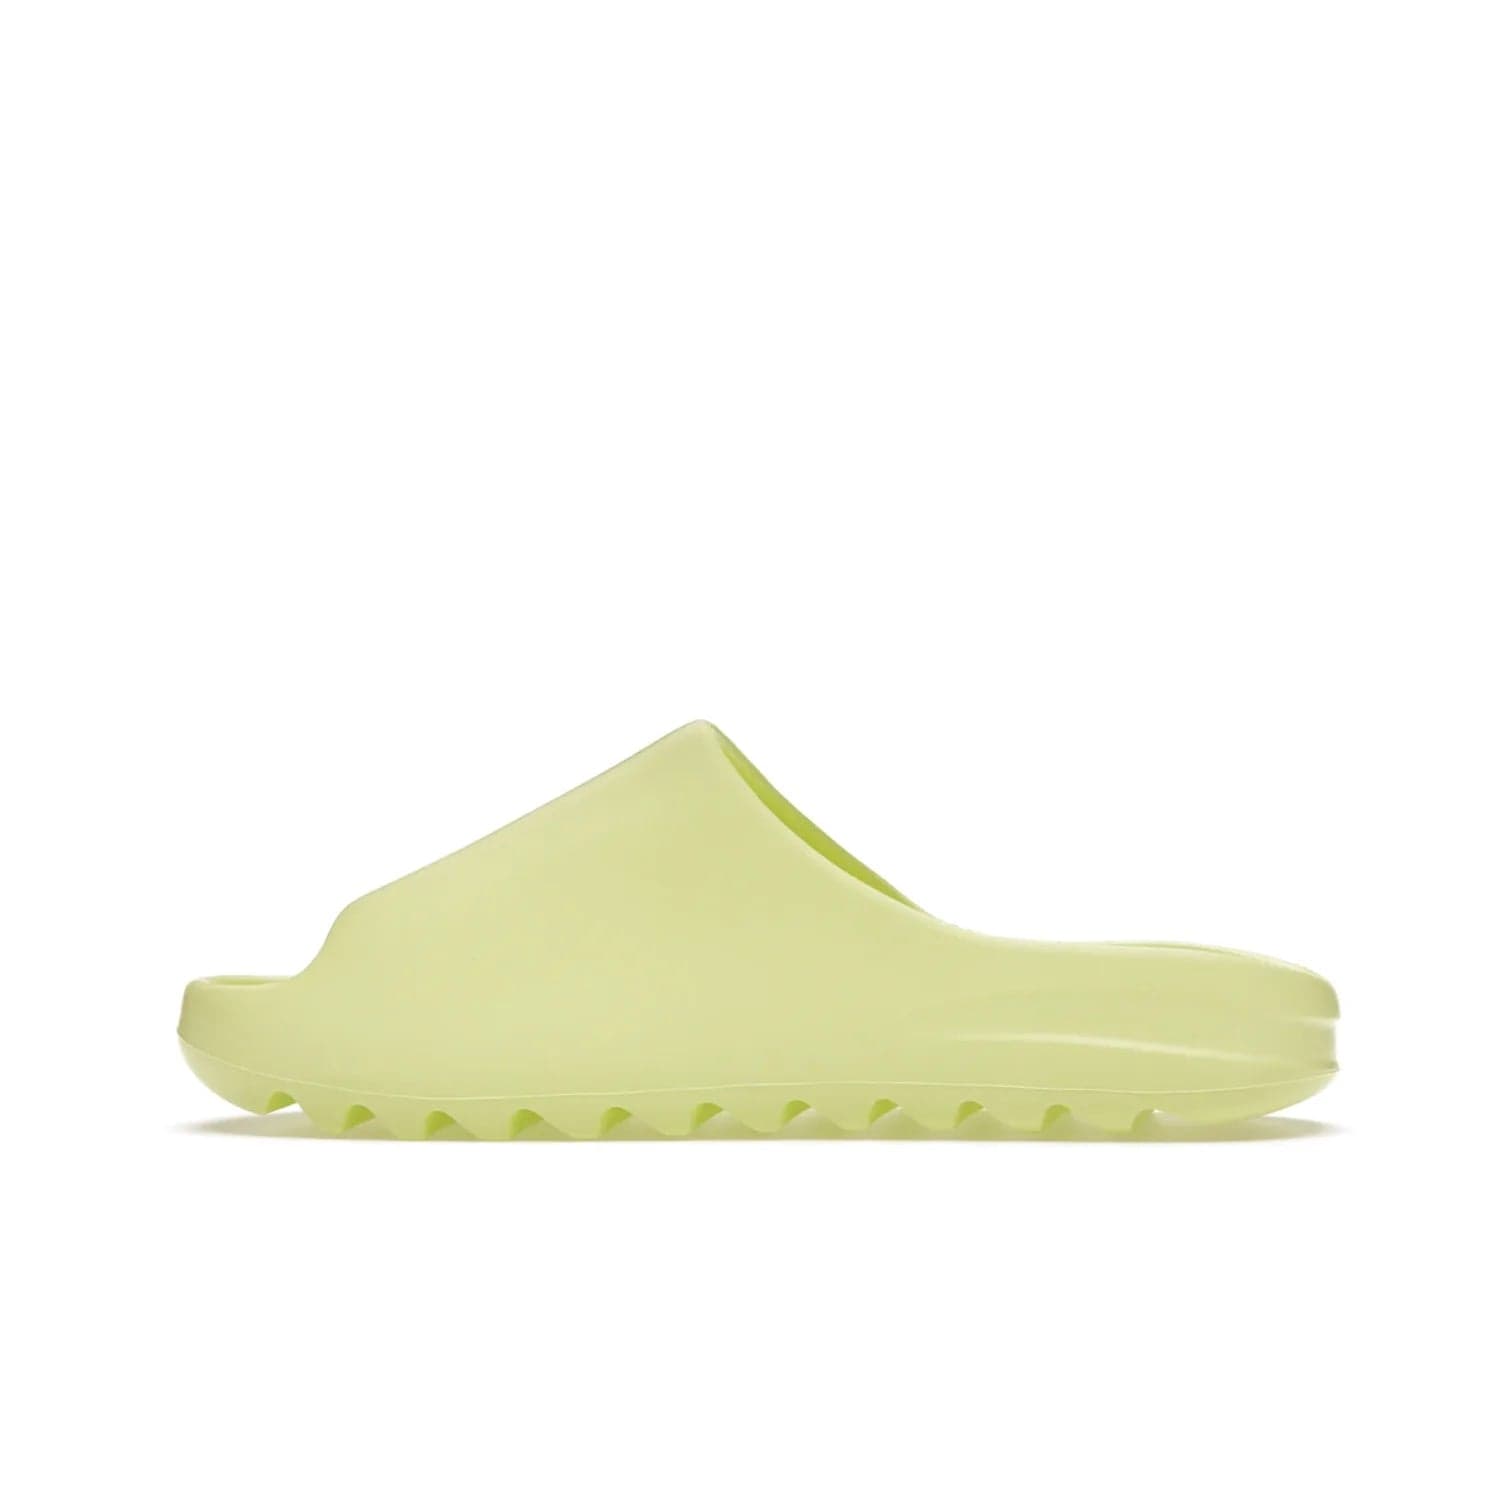 adidas Yeezy Slide Glow Green - Image 20 - Only at www.BallersClubKickz.com - Experience an unexpected summer style with the adidas Yeezy Slide Glow Green. This limited edition slide sandal provides a lightweight and durable construction and a bold Glow Green hue. Strategic grooves enhance traction and provide all-day comfort. Make a statement with the adidas Yeezy Slide Glow Green.